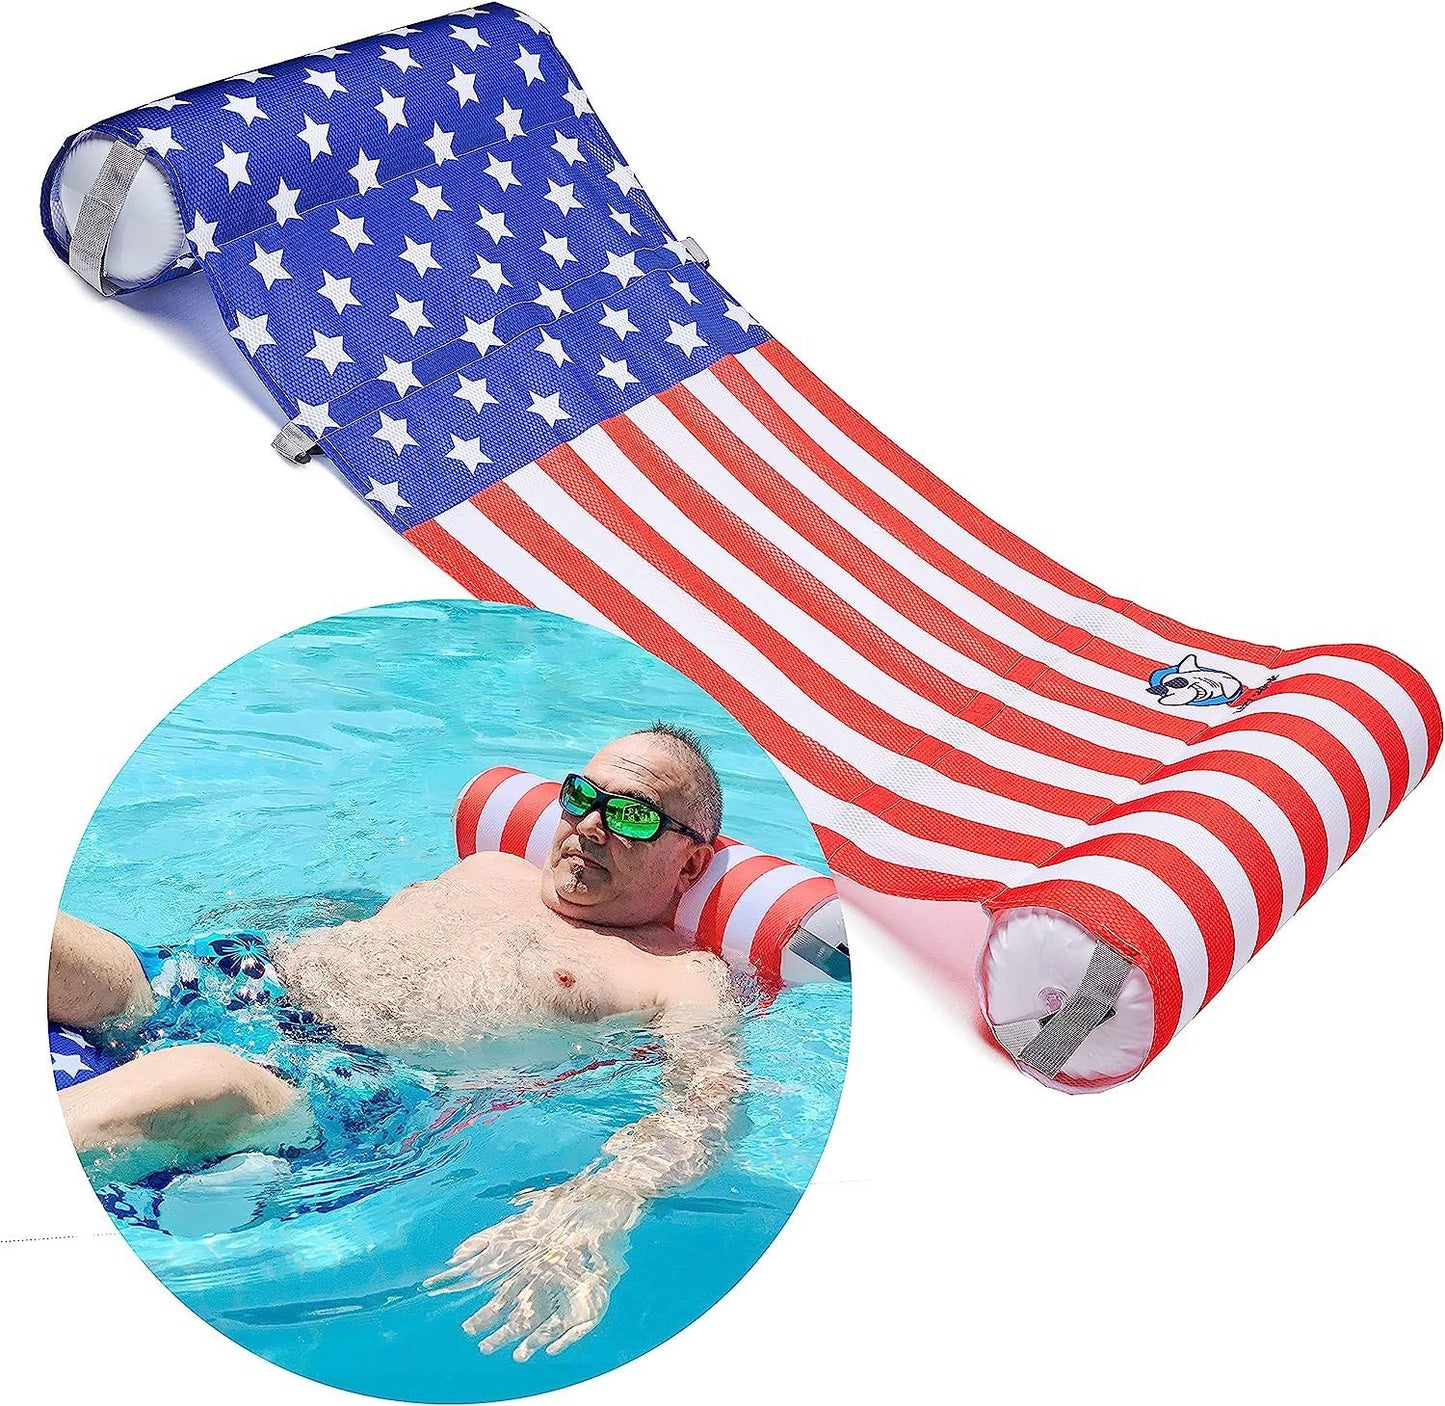 Hammock Chair Pool Floats for Adult